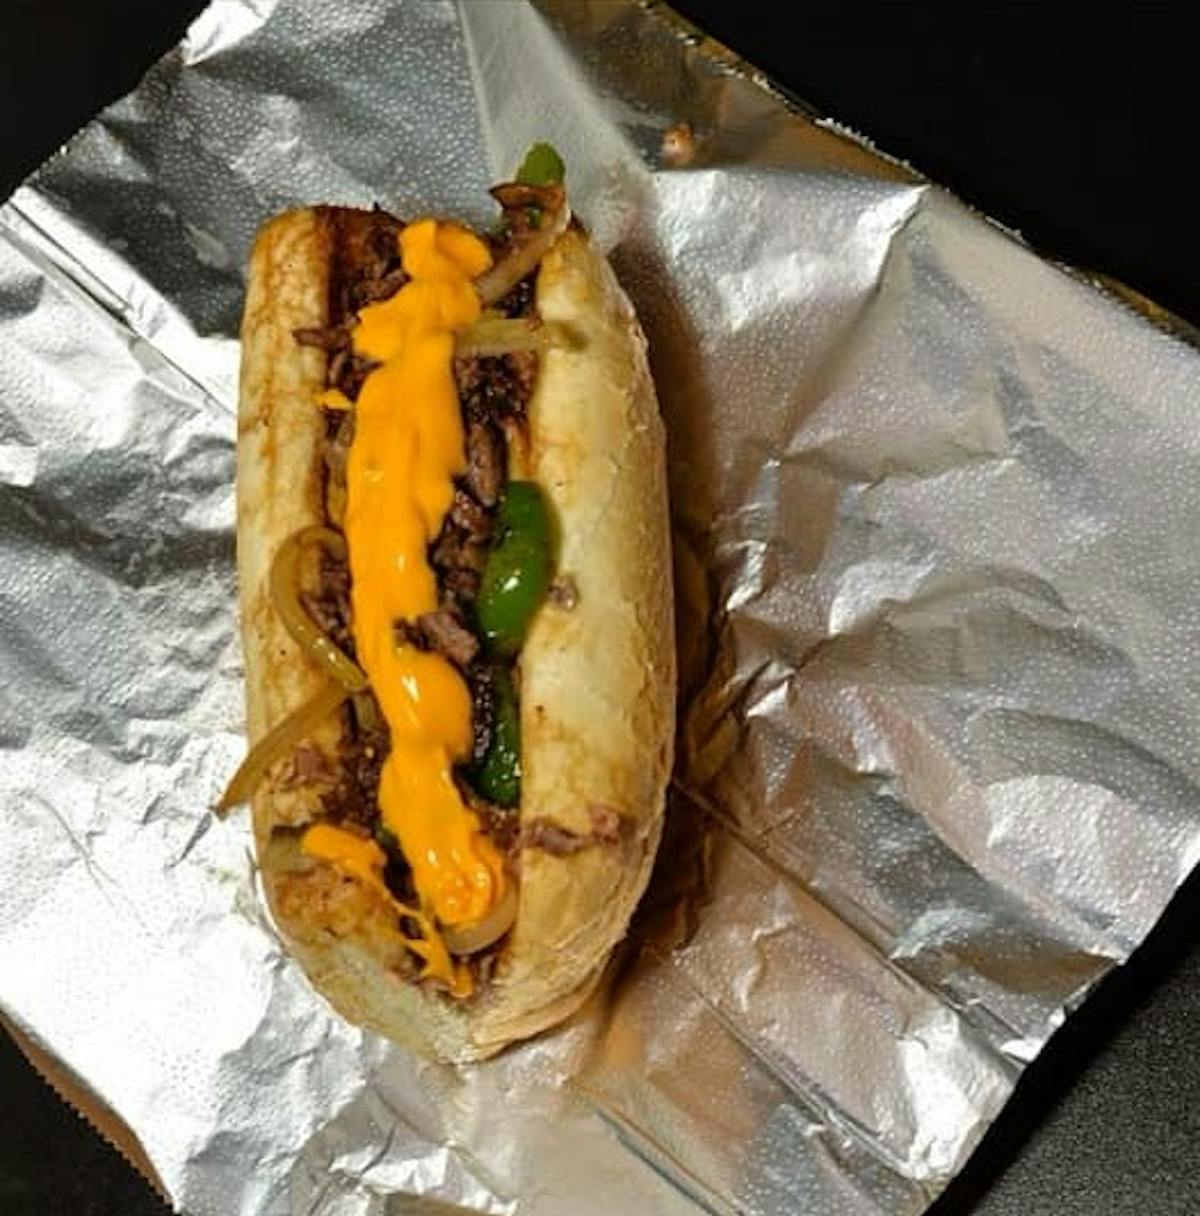 a close up of a hot dog wrapped in a paper bag